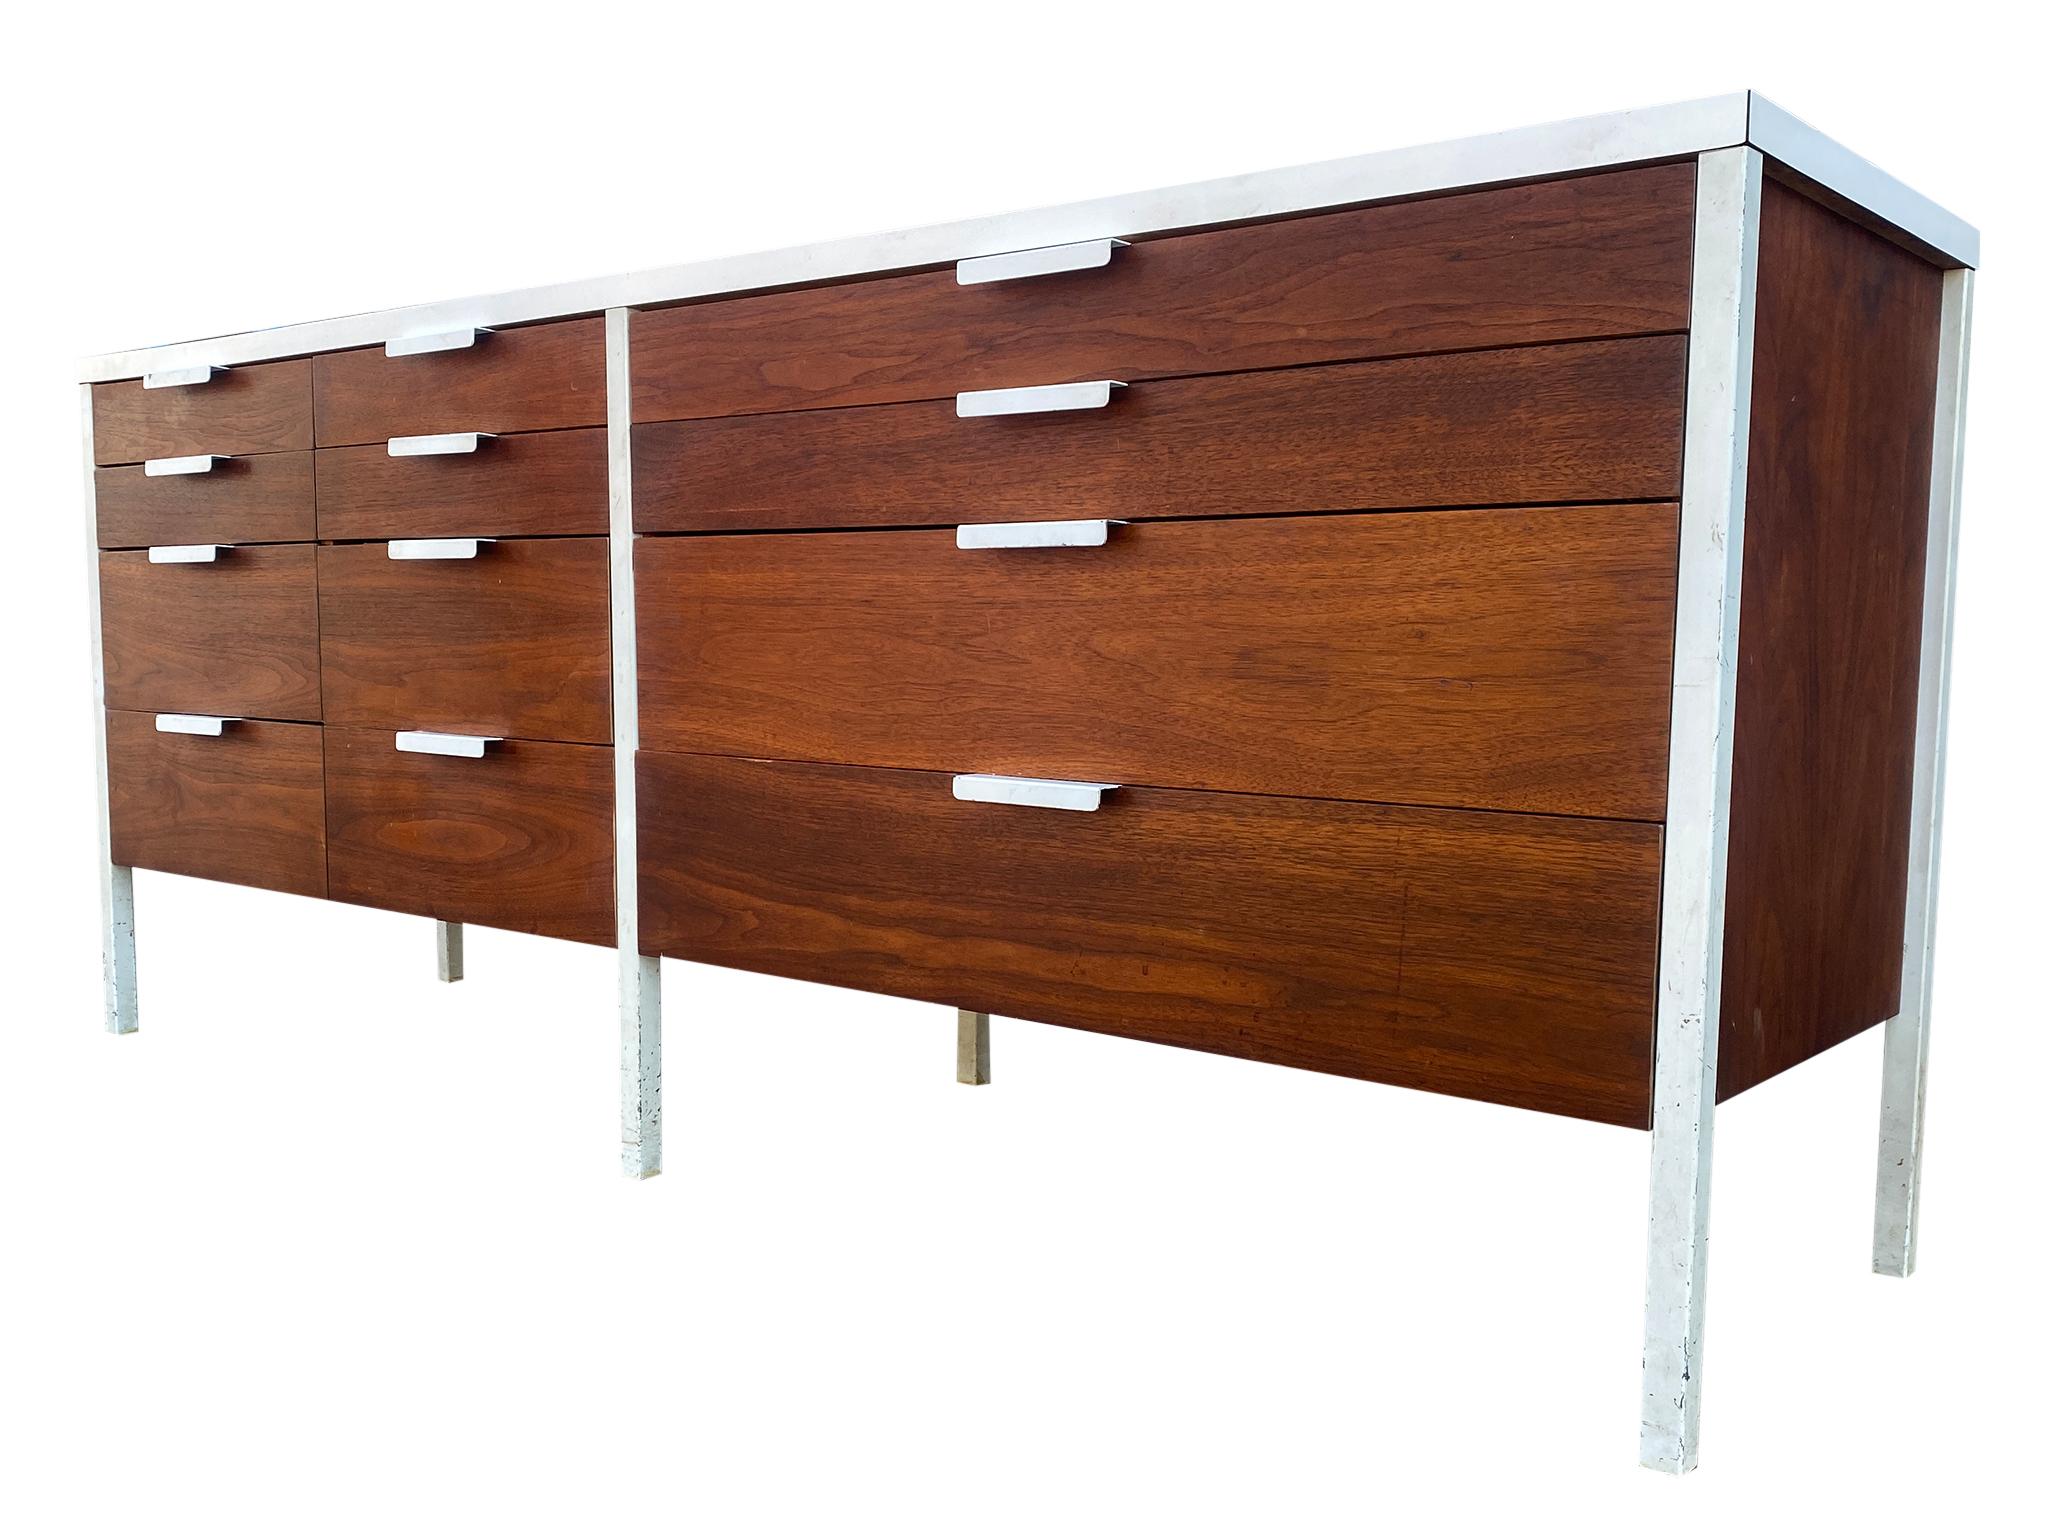 Stunning Swedish Mid-Century Modern 12 drawer dresser credenza white laminate top and metal legs/pulls. Impressive construction and very beautiful modern design. All 12 teak and hardwood drawers slide smooth and very clean inside and out. Very